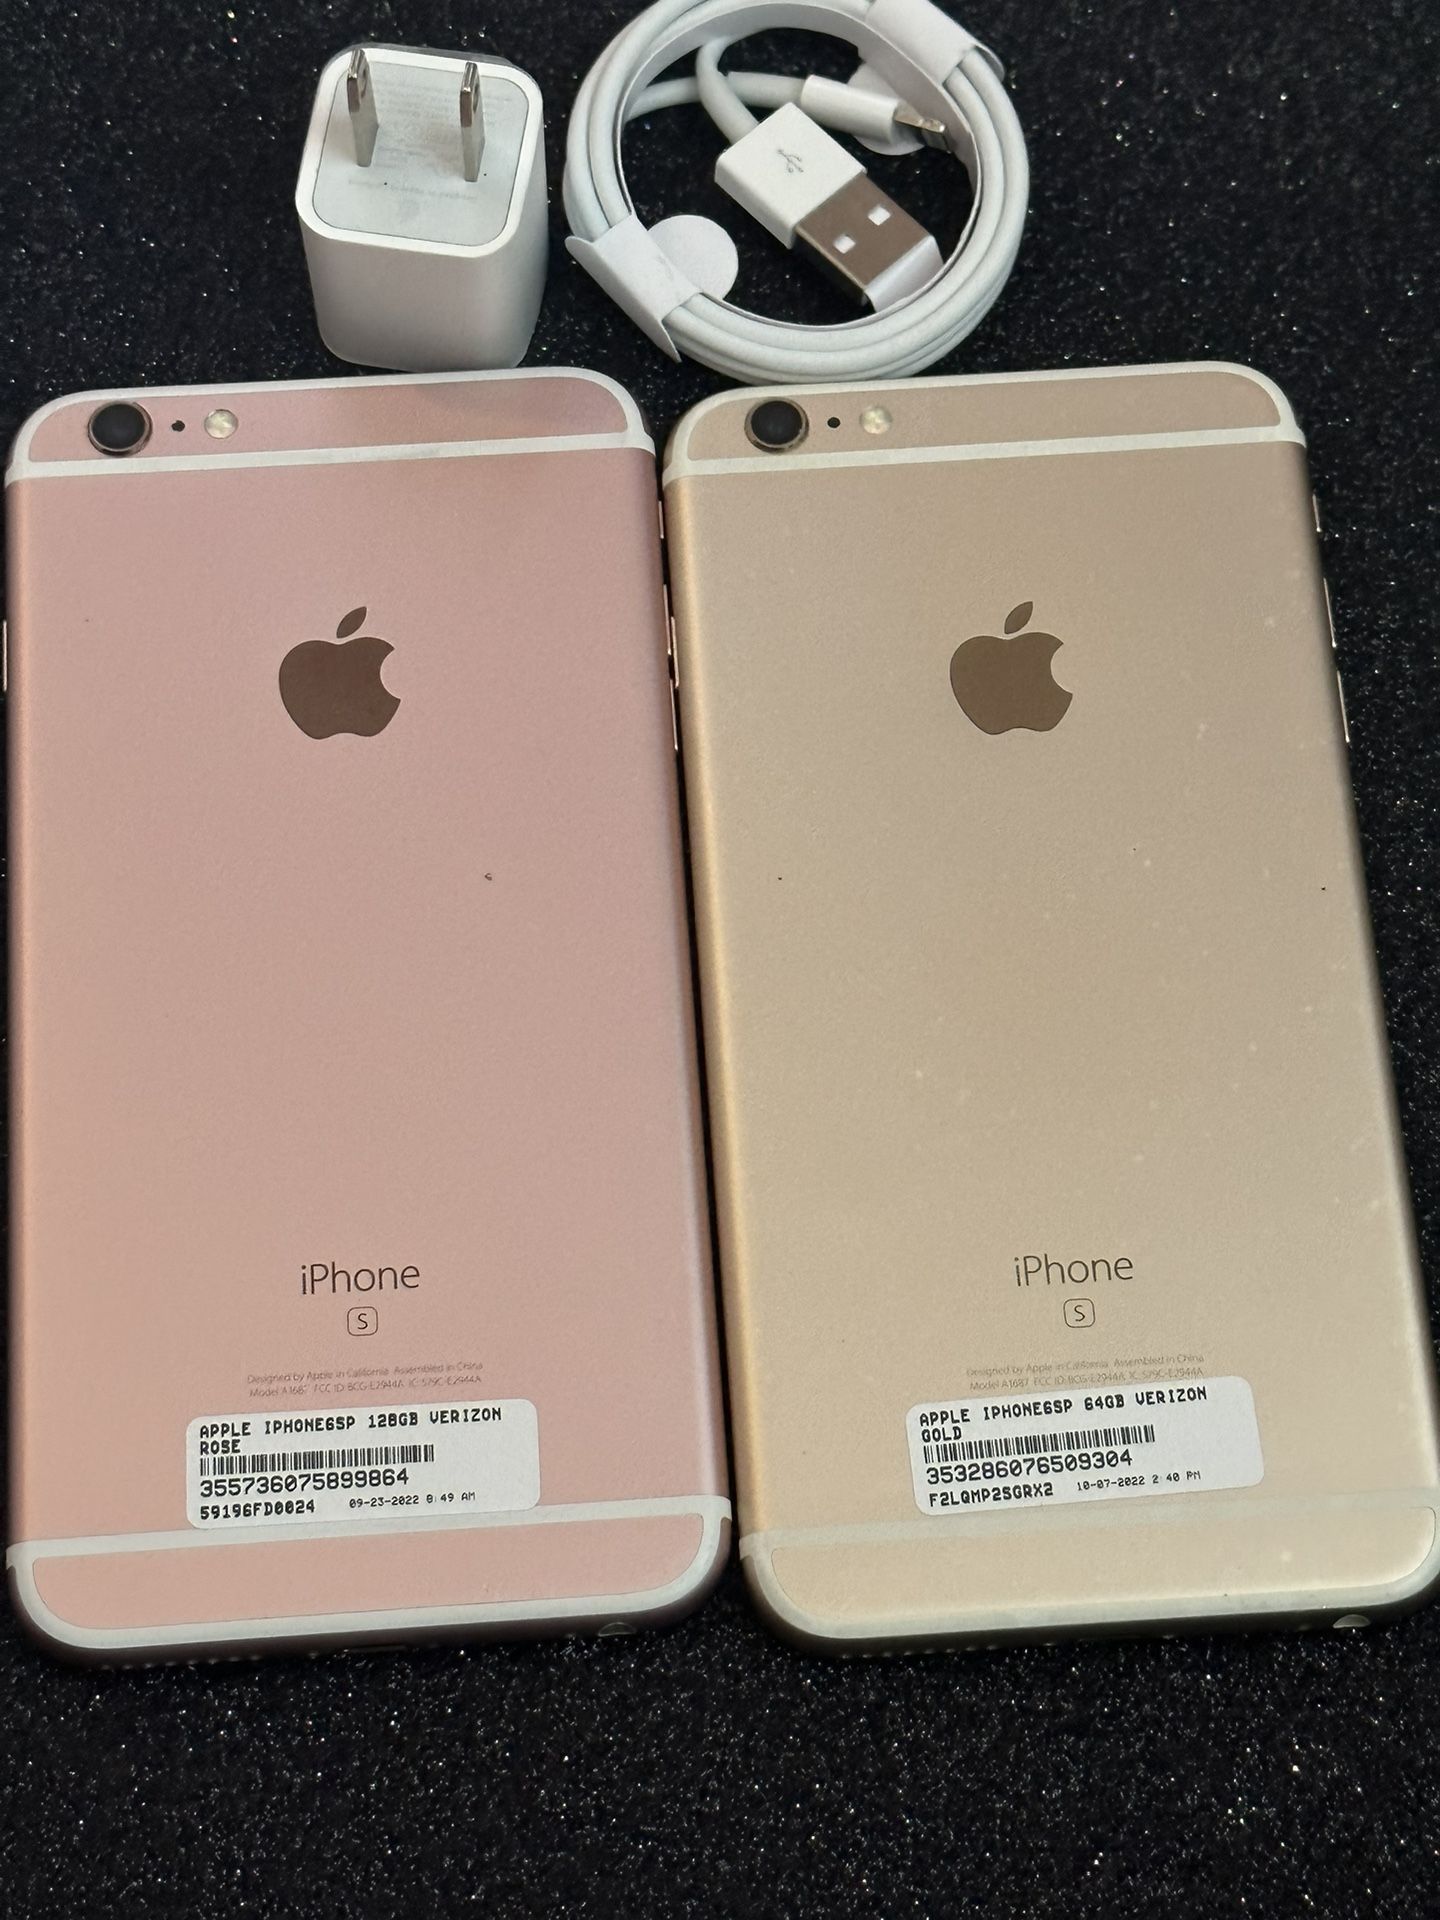 IPhone 6s Plus (64gb) Gold And Rosegold UNLOCKED